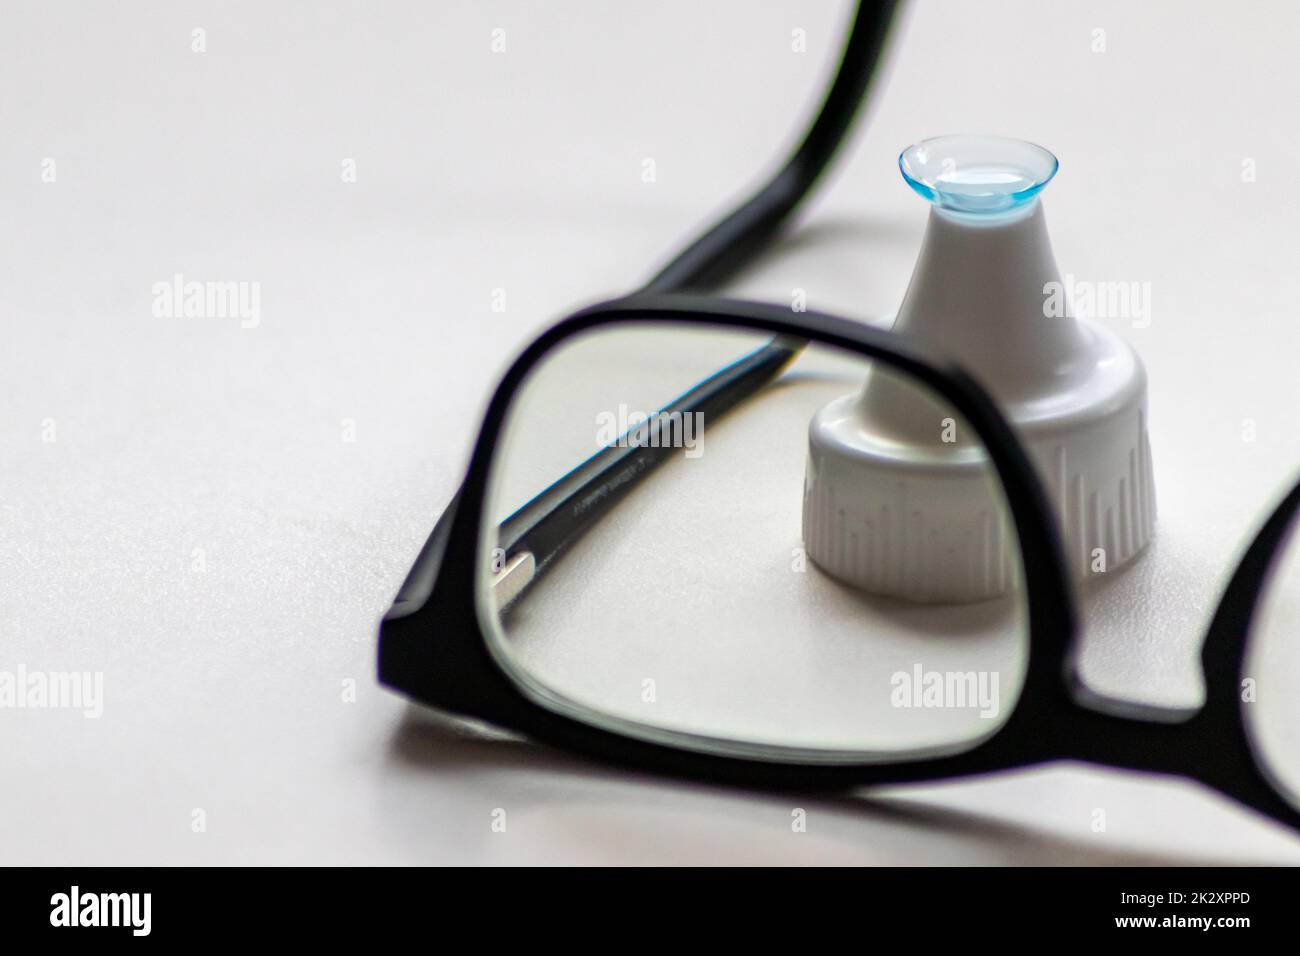 Blue contact lens through black eyeglasses shows different eyewear to correct farsightedness and nearsightedness by optometry or eye doctor against myopia with visual eye correction for perfect vision Stock Photo